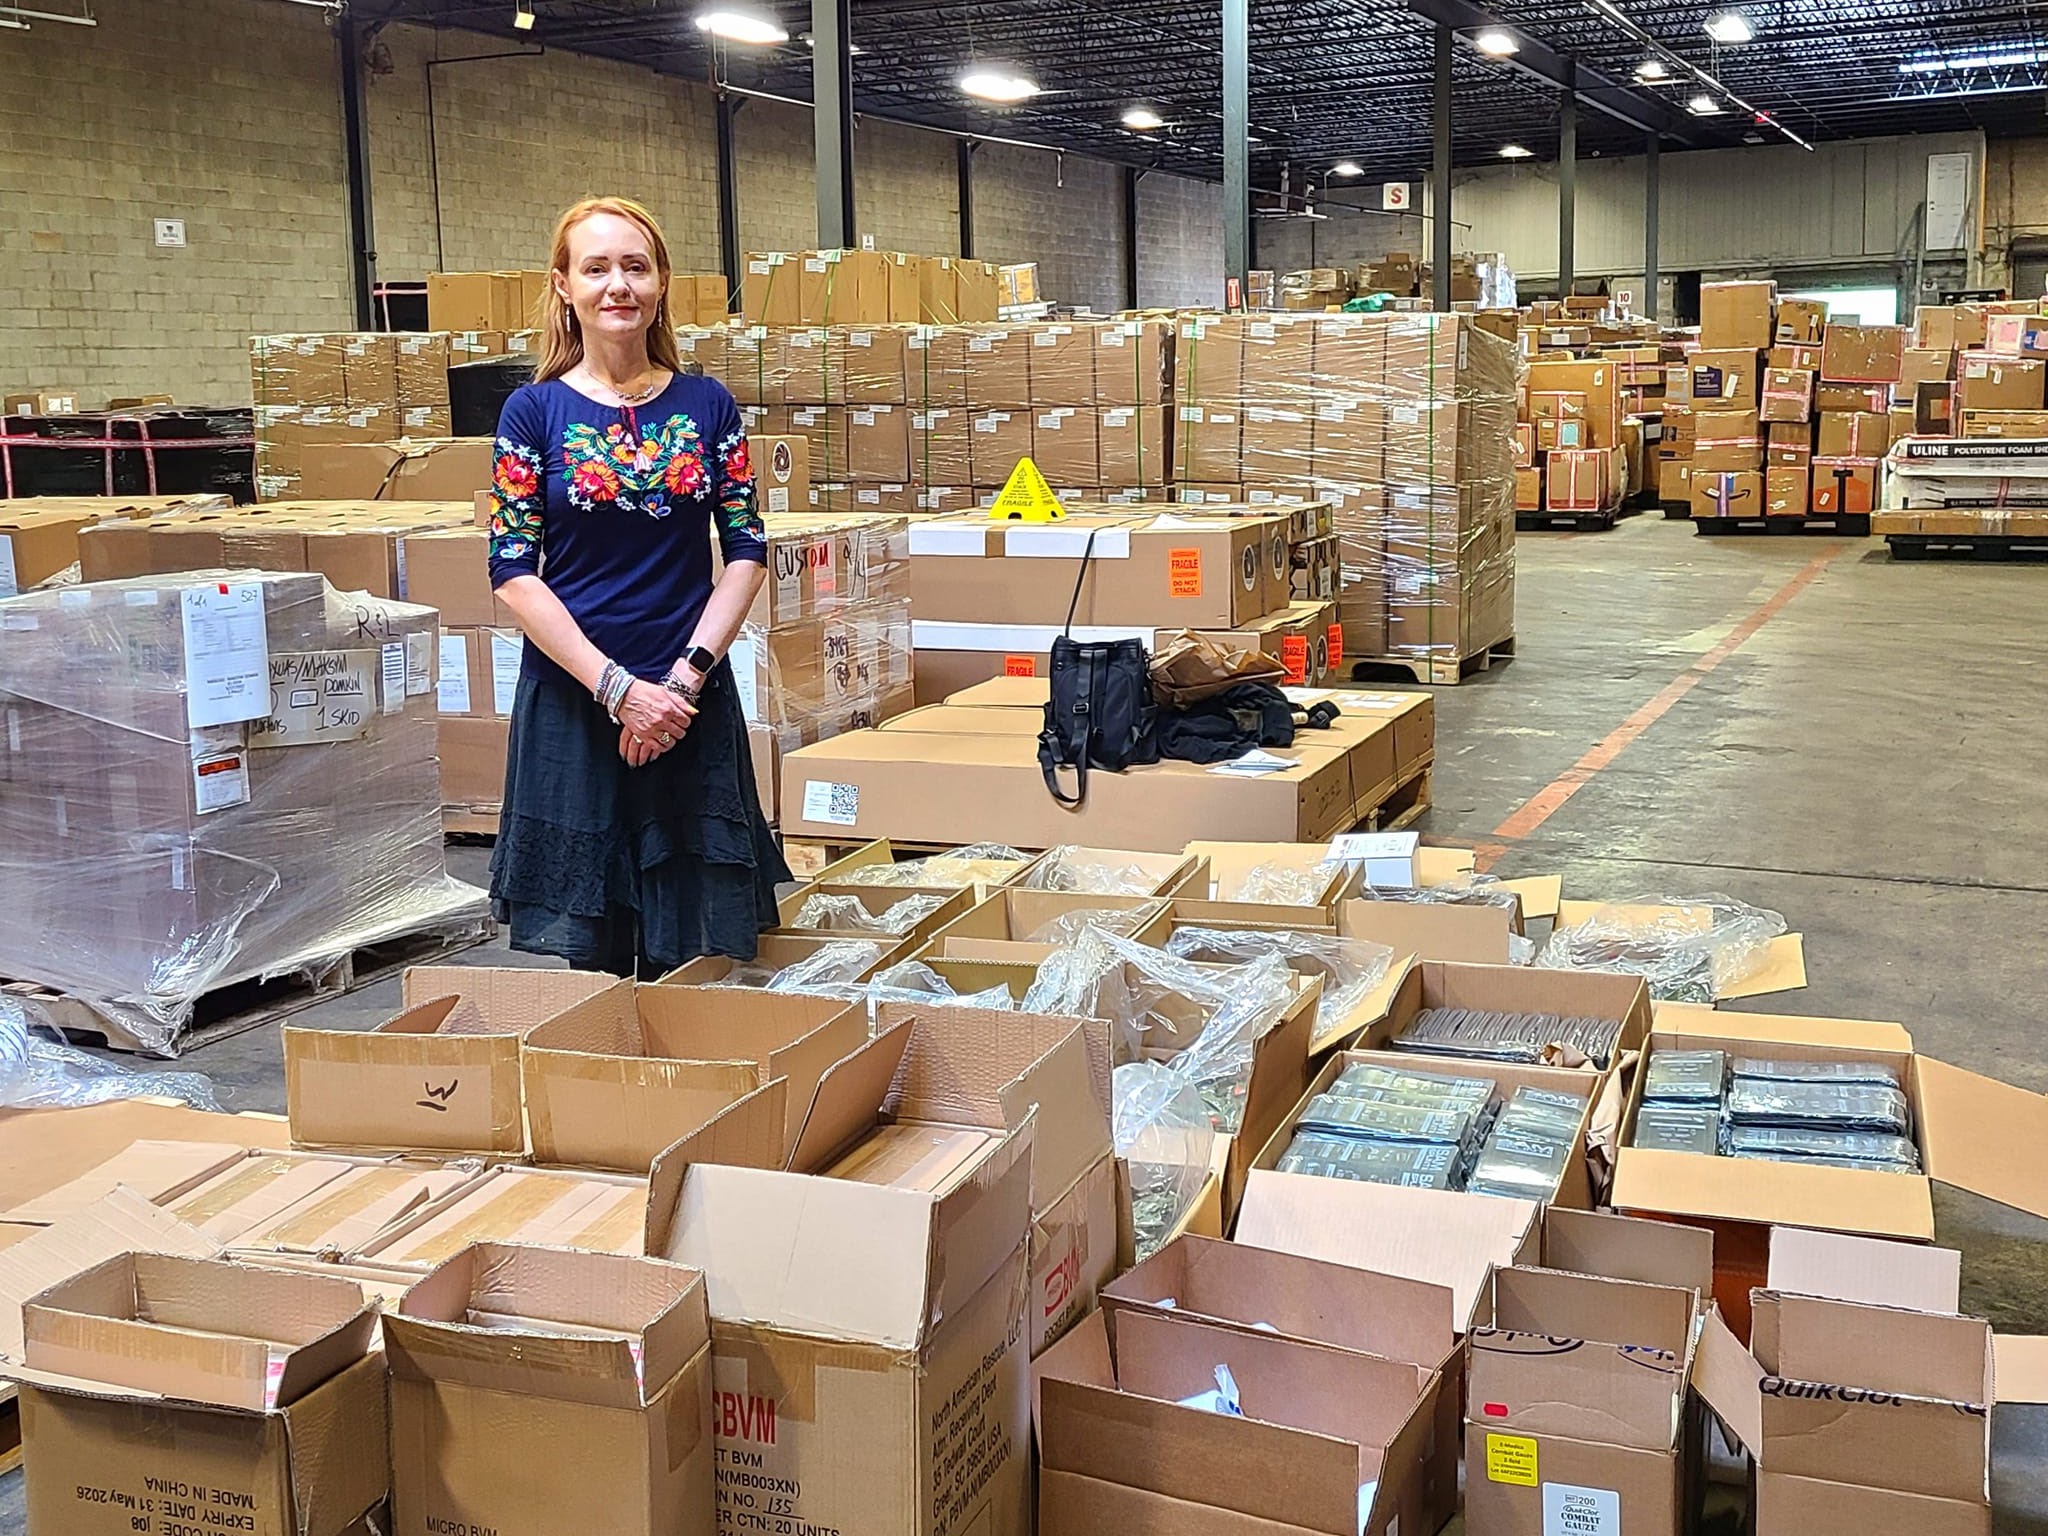 USUA's president, Nadiya Shaporynska, displays humanitarian and medical aid about to be shipped from the US to Ukraine